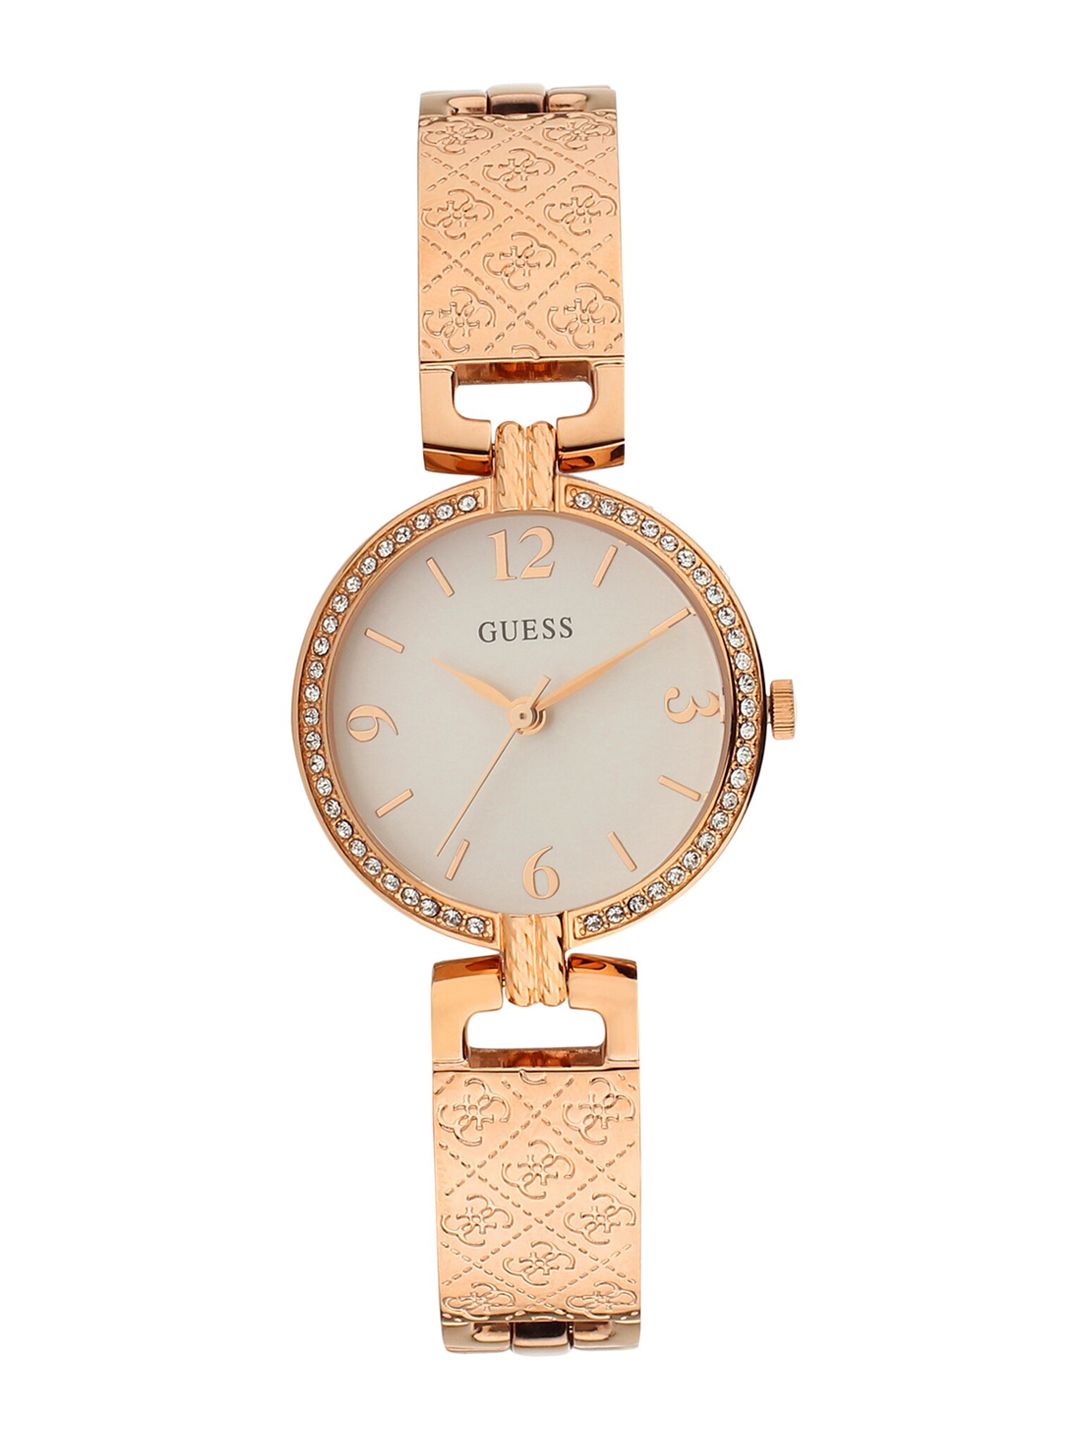 GUESS Women Rose Gold-Toned Embellished Dial & Stainless Steel Watch GW0112L3 Price in India